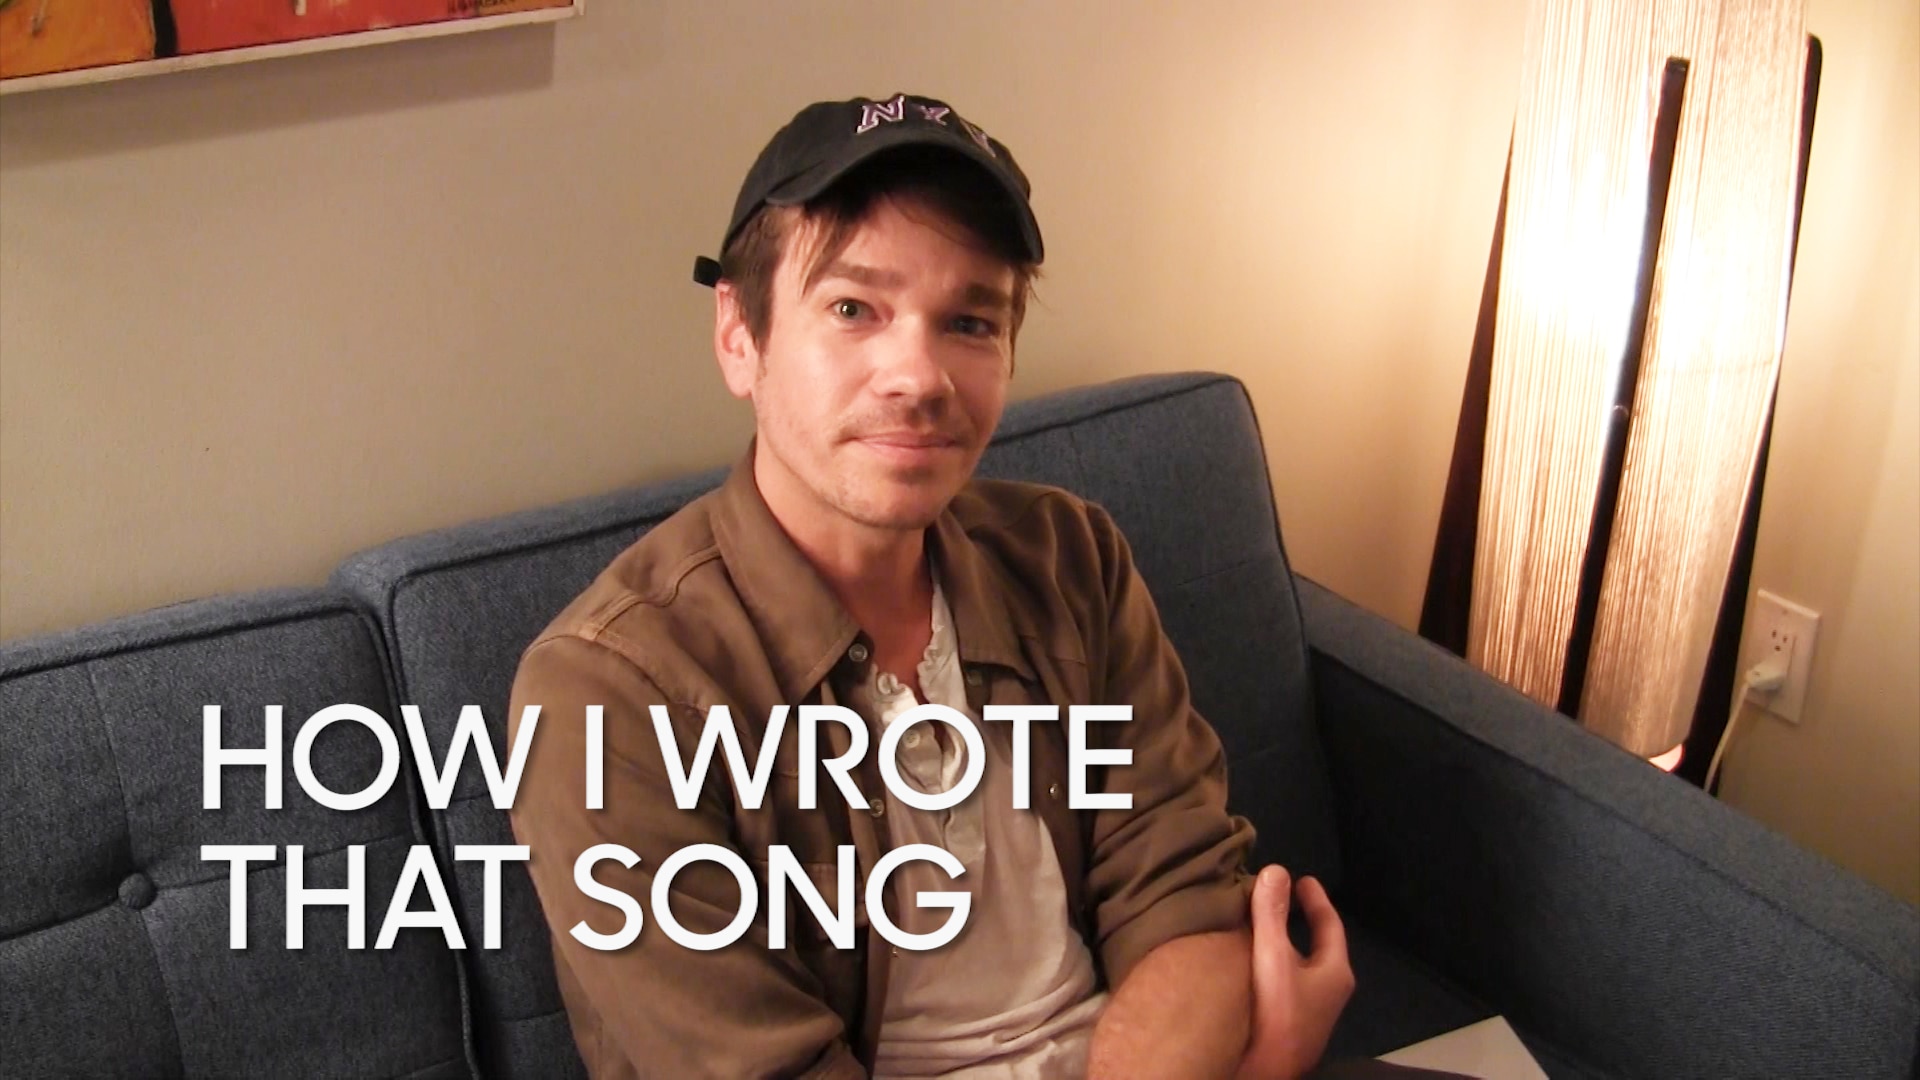 Hockey fan Nate Ruess planning some fun for NHL Winter Classic